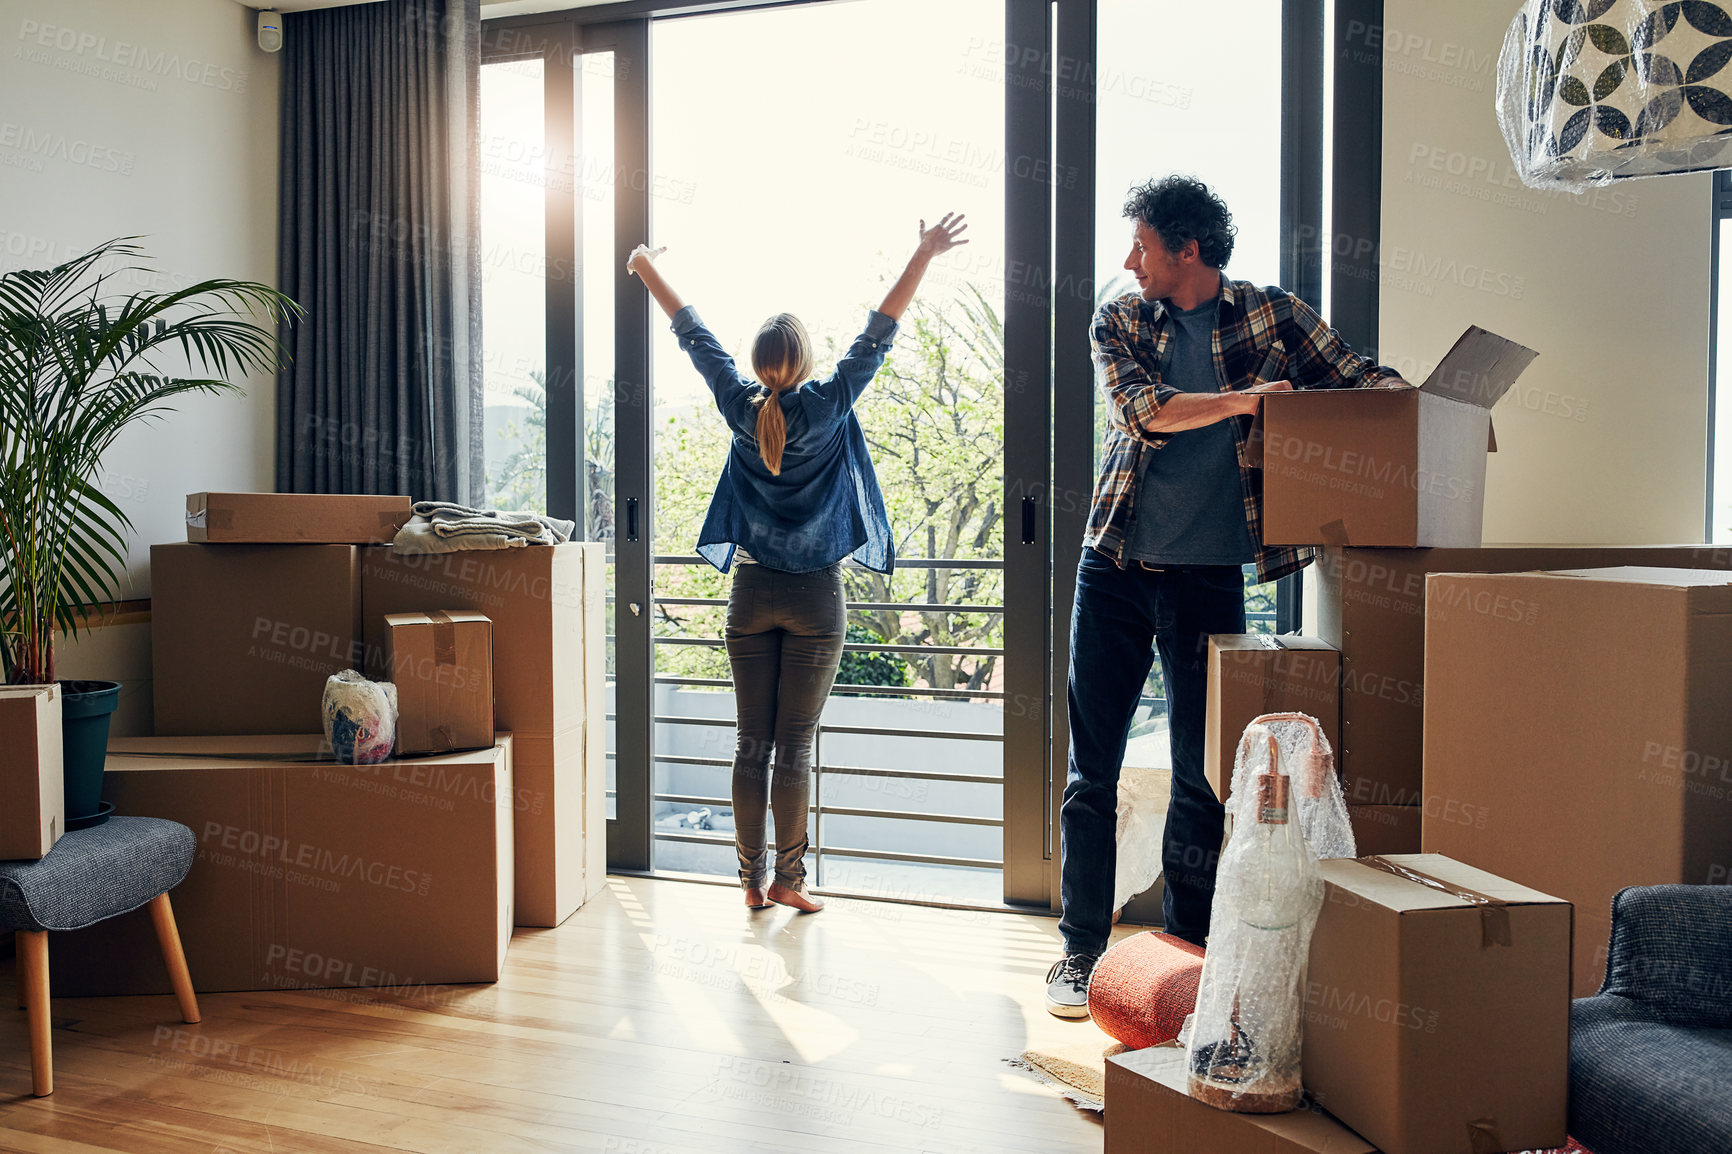 Buy stock photo Shot of a cheerful middle aged woman stretching her arms out on her balcony while her husband looks at her and packs out boxes on moving day